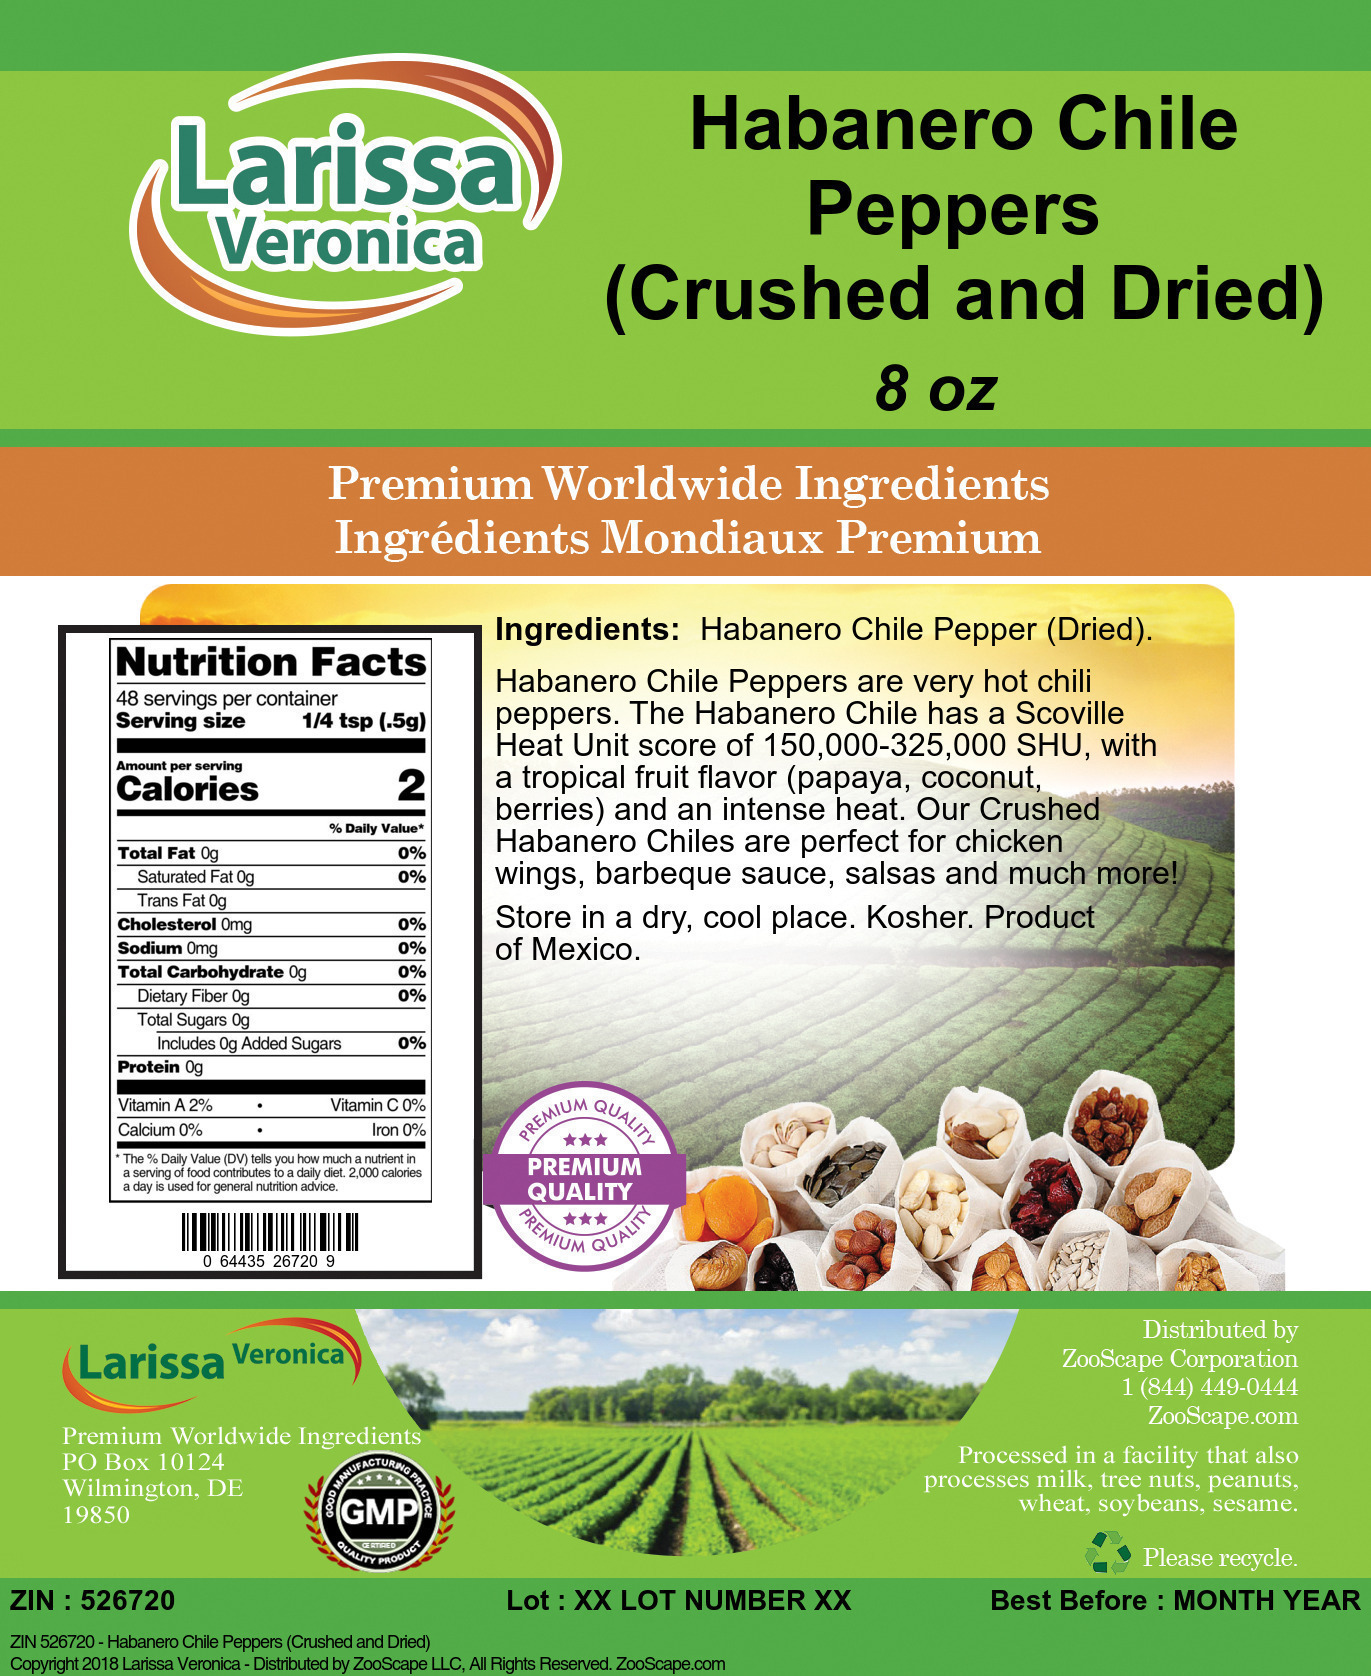 Habanero Chile Peppers (Crushed and Dried) - Label